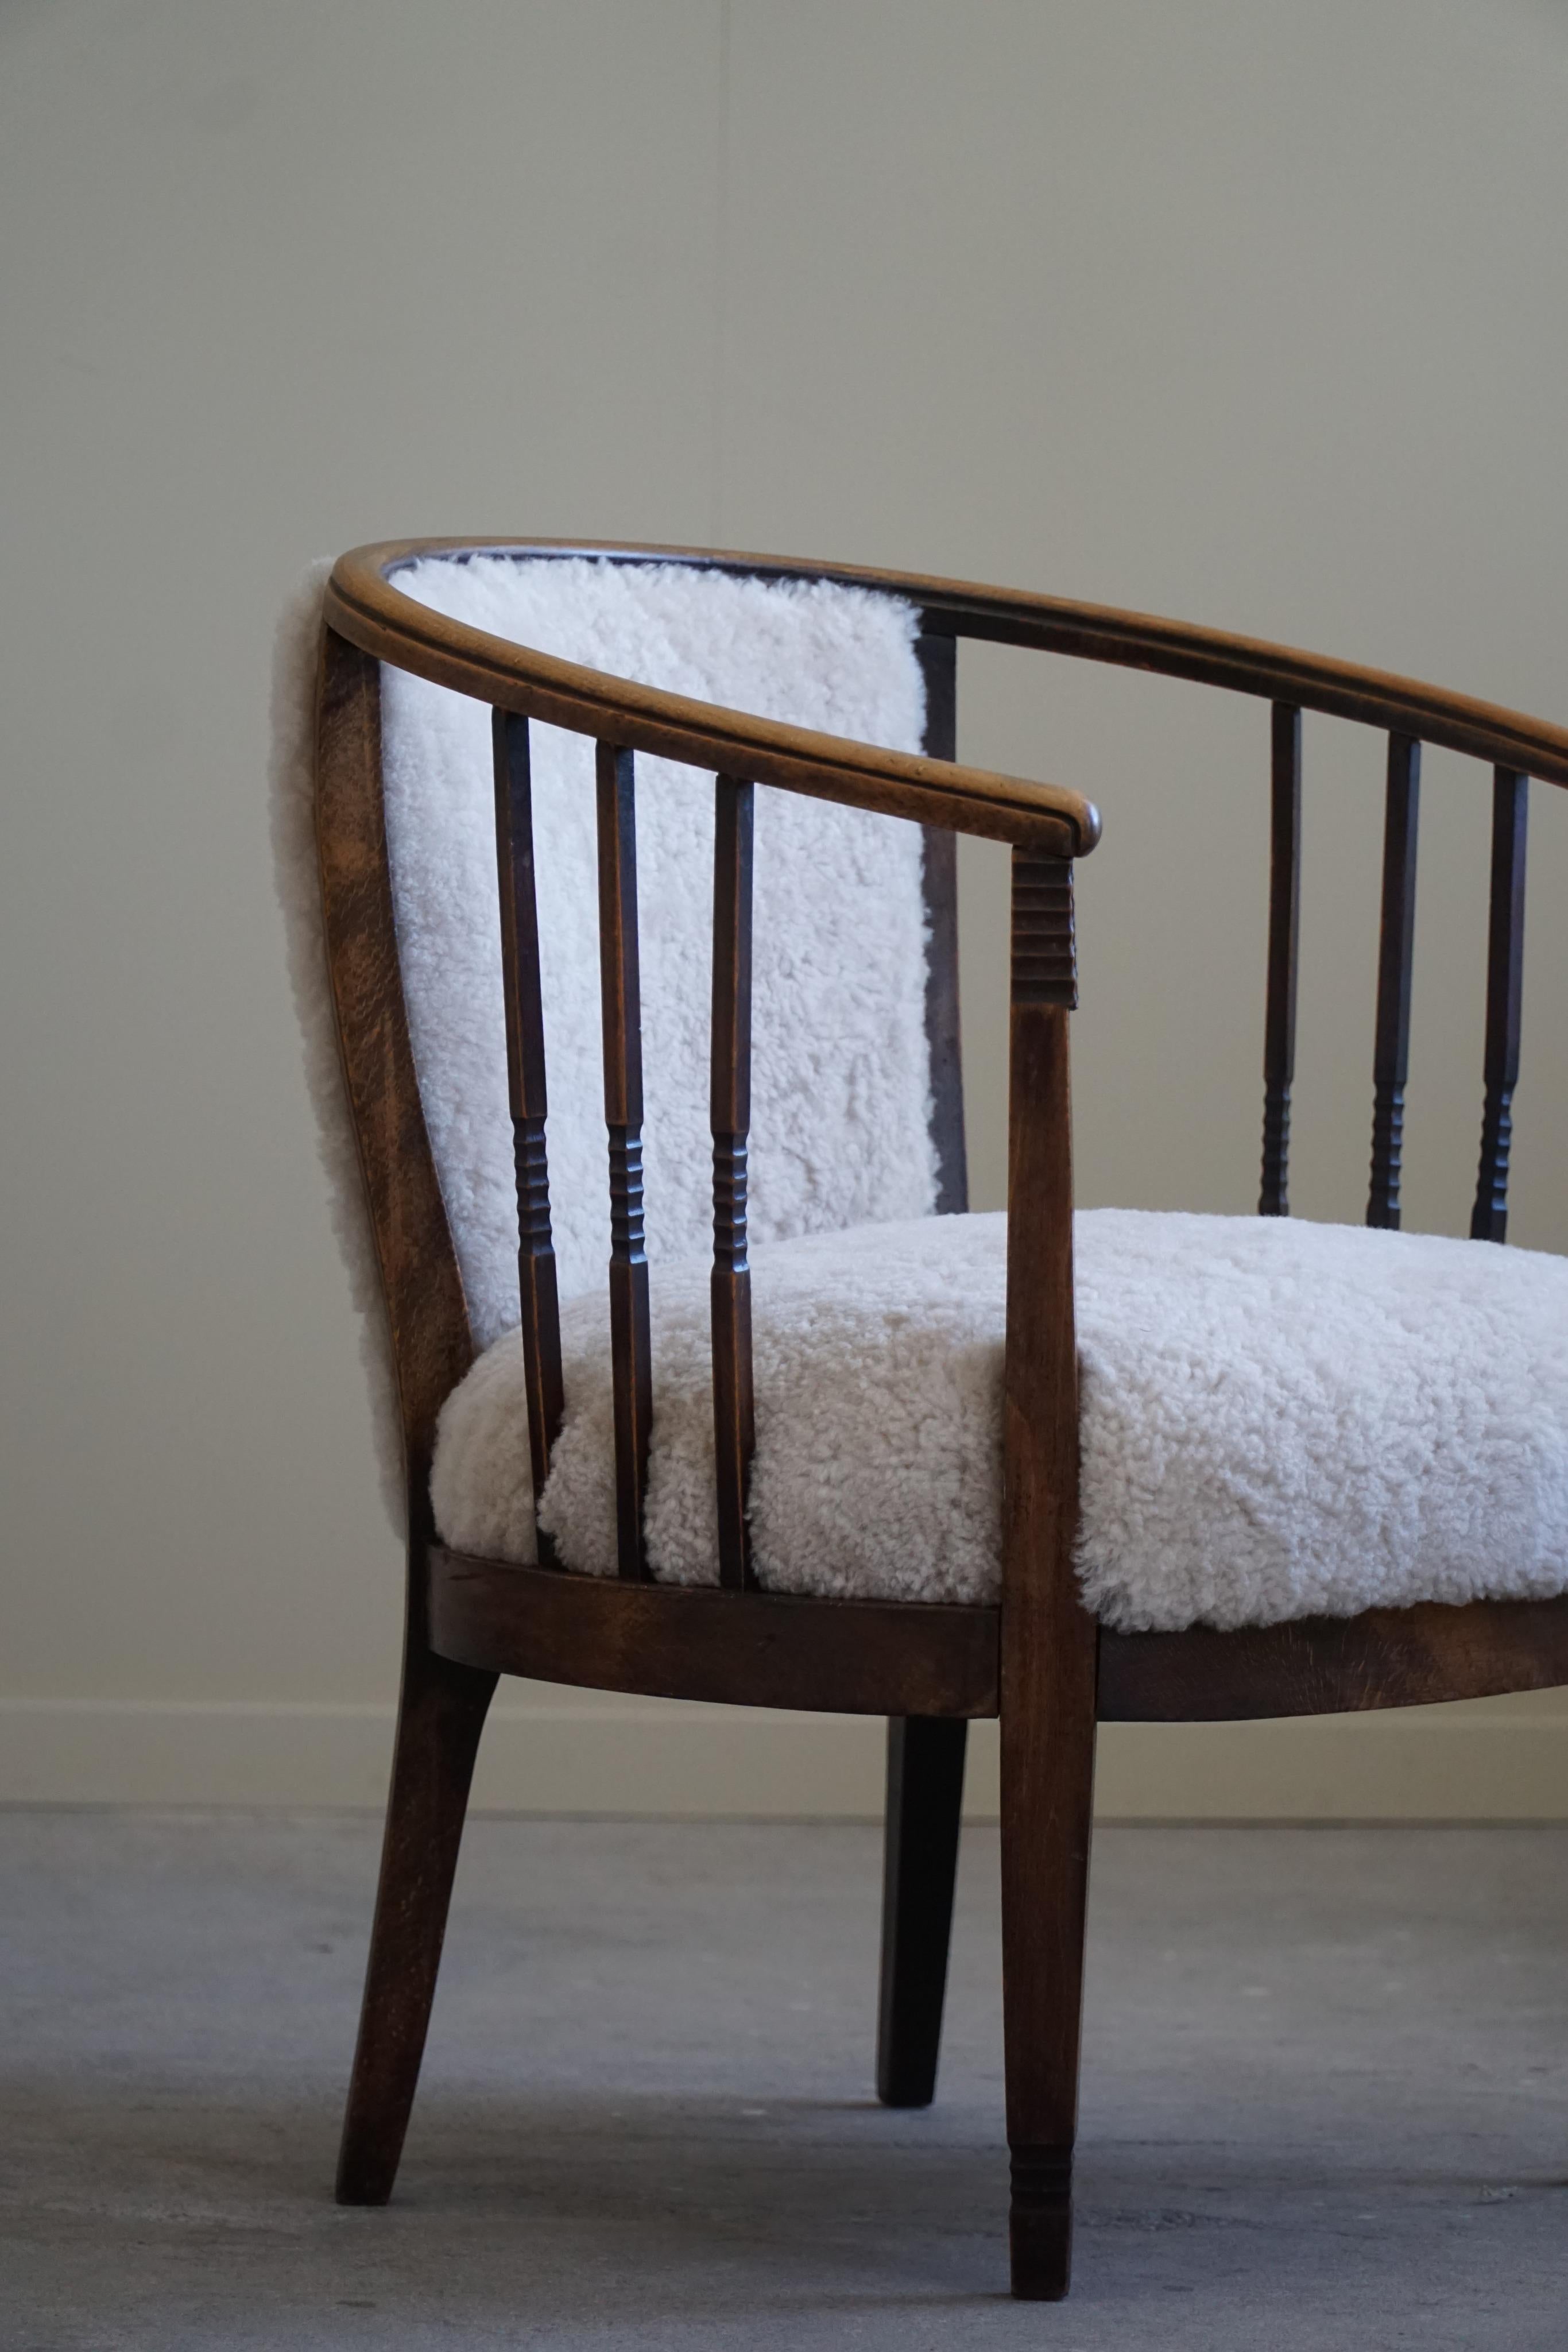 Pair of Danish Armchairs in Beech, Reupholstered Lambswool, Jugendstil, 1900s For Sale 8